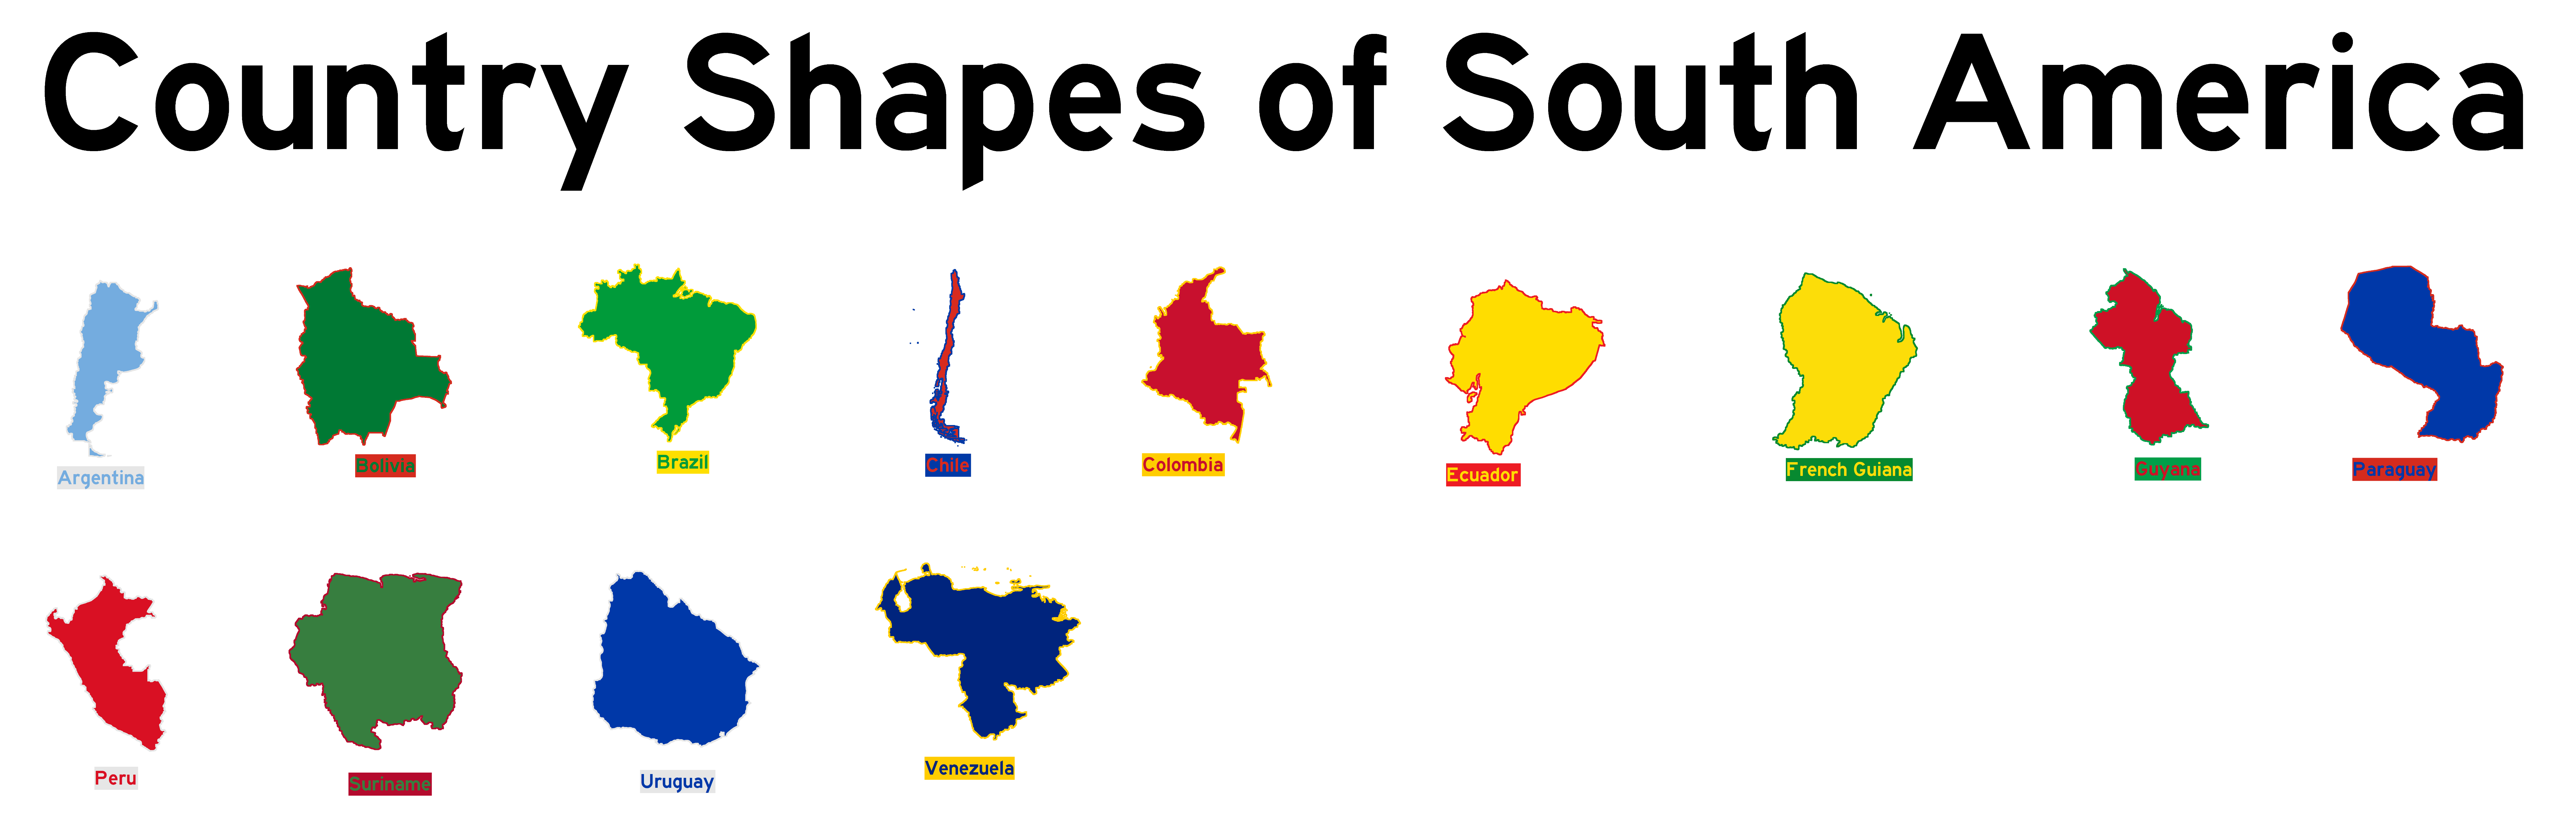 Country Shapes of South America (White Background) by HispaniolaNewGuinea  on DeviantArt